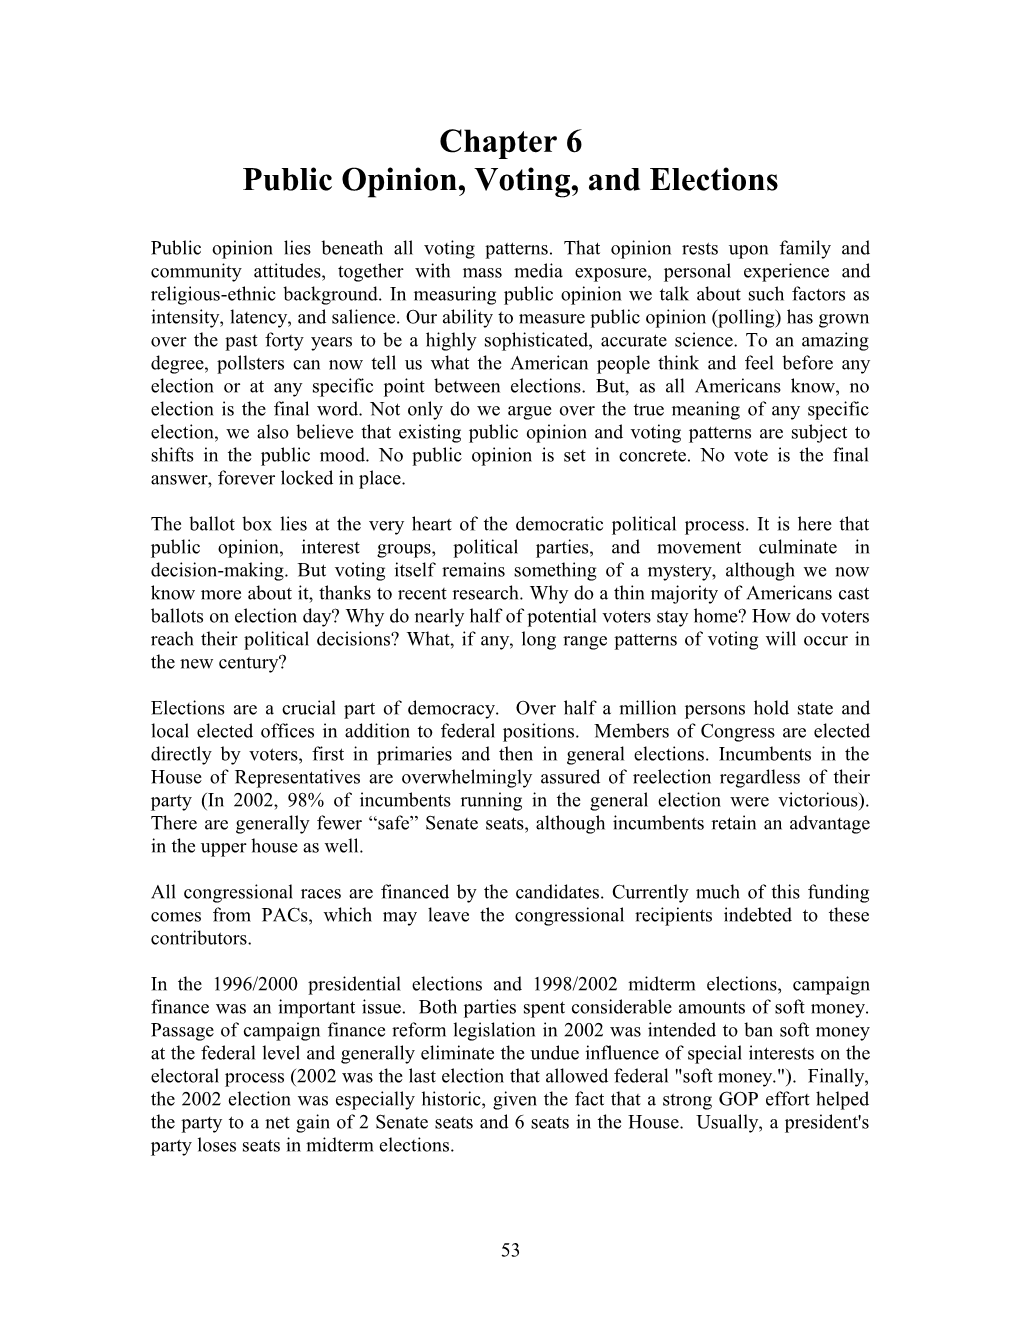 Chapter 6 Public Opinion, Voting, and Elections